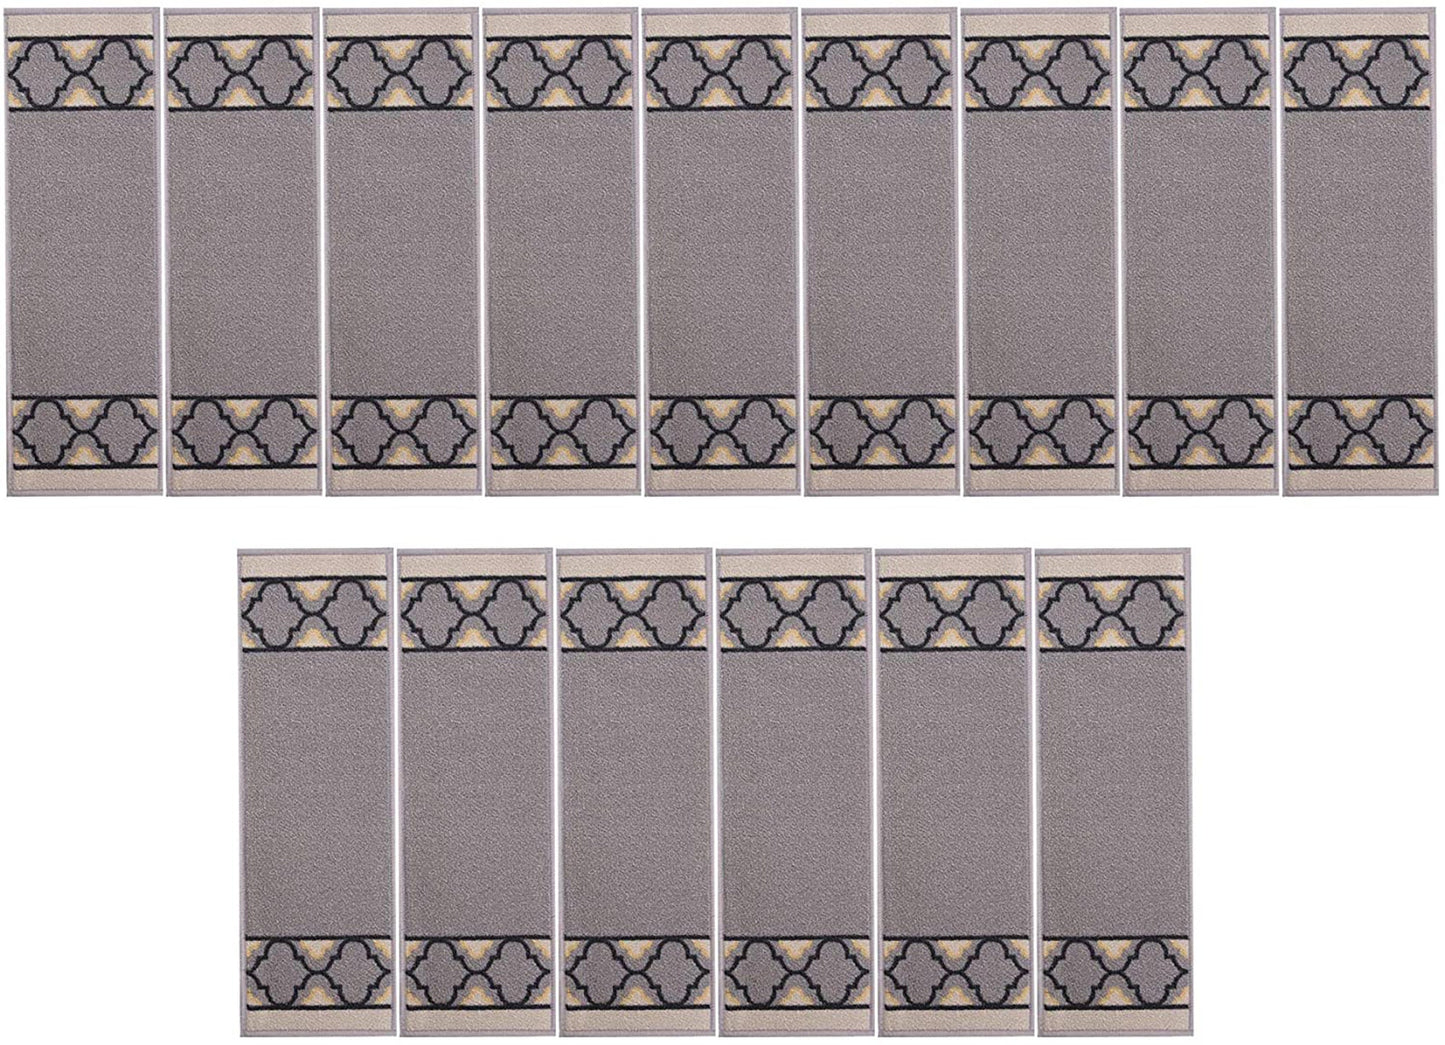 Machine Washable Stair Tread Trellis Bordered Grey and Black Skid Resistant Latex Back Carpet Stair Treads Size 8.5" x 26" Many Set Options